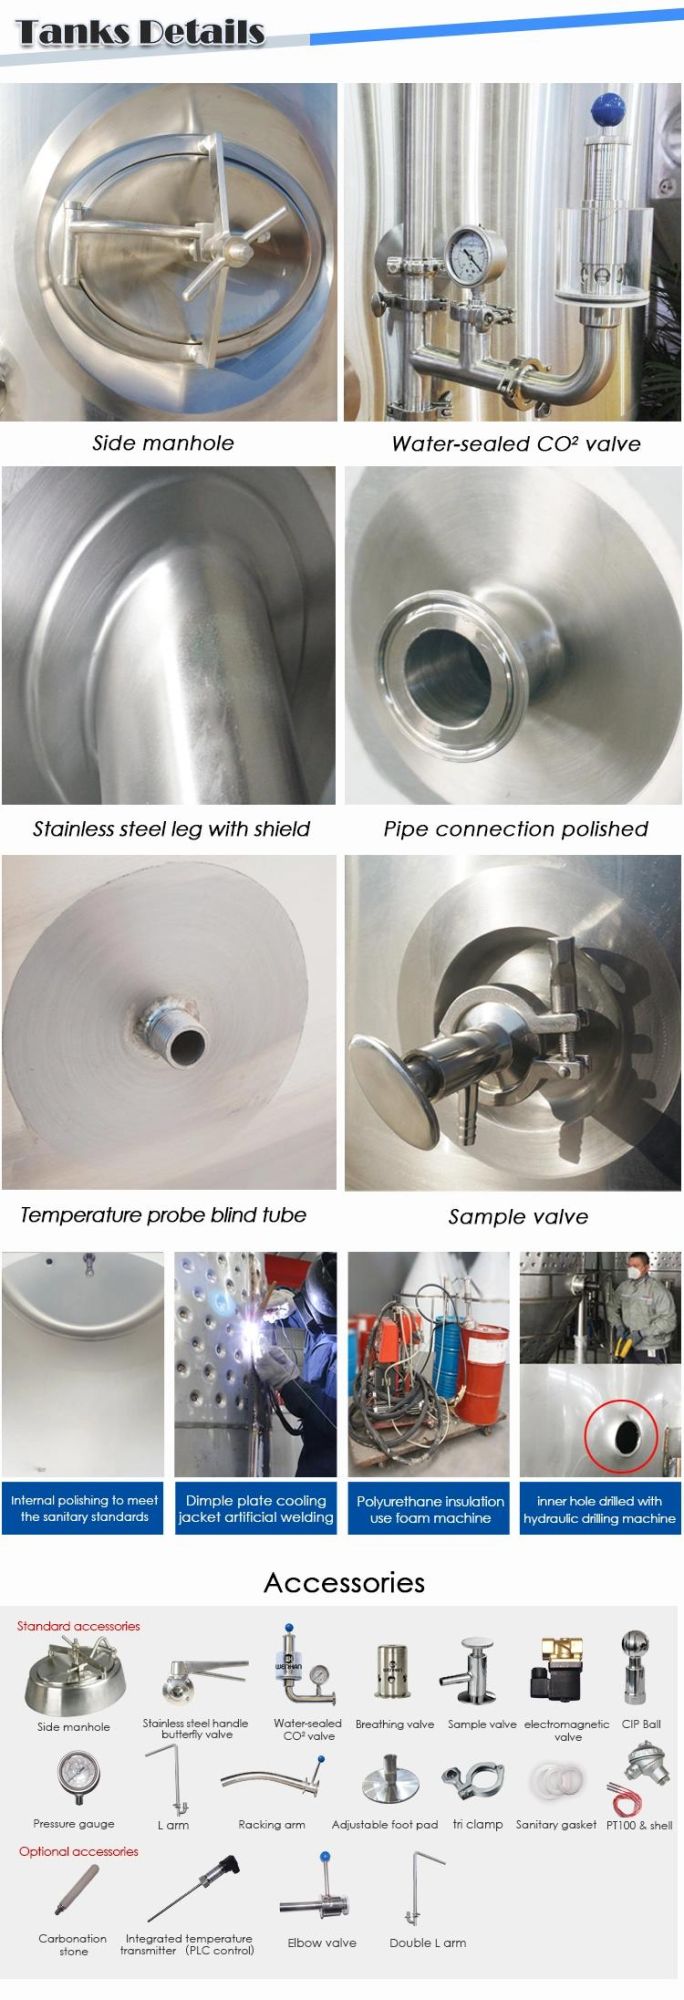 40bbl Conical Beer Fermenter Equipment with Dimple Cooling Jacket